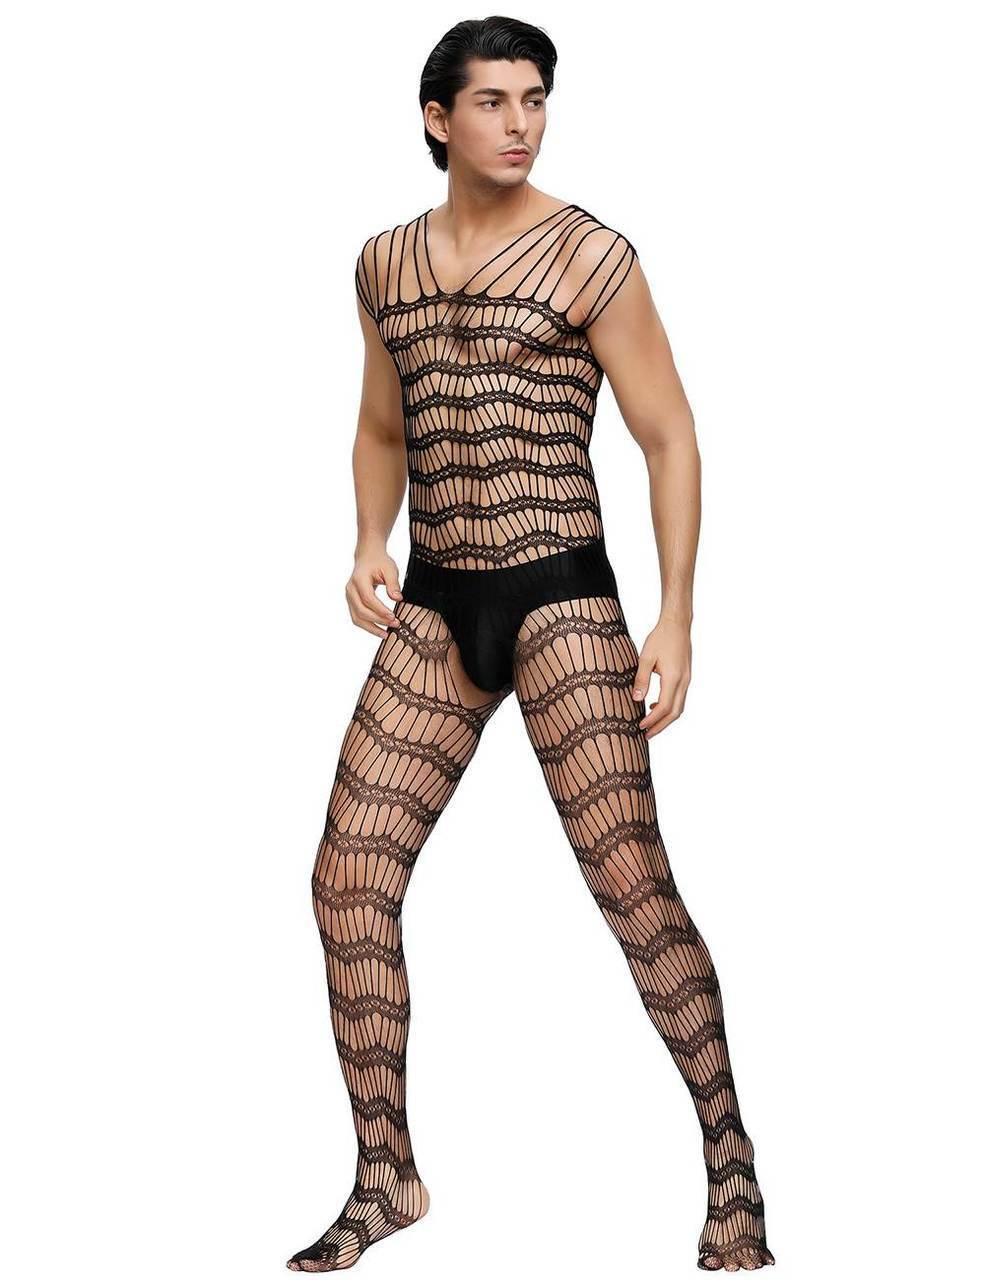 Mens Bodystocking Sheer Open Net with Strappy Shoulders